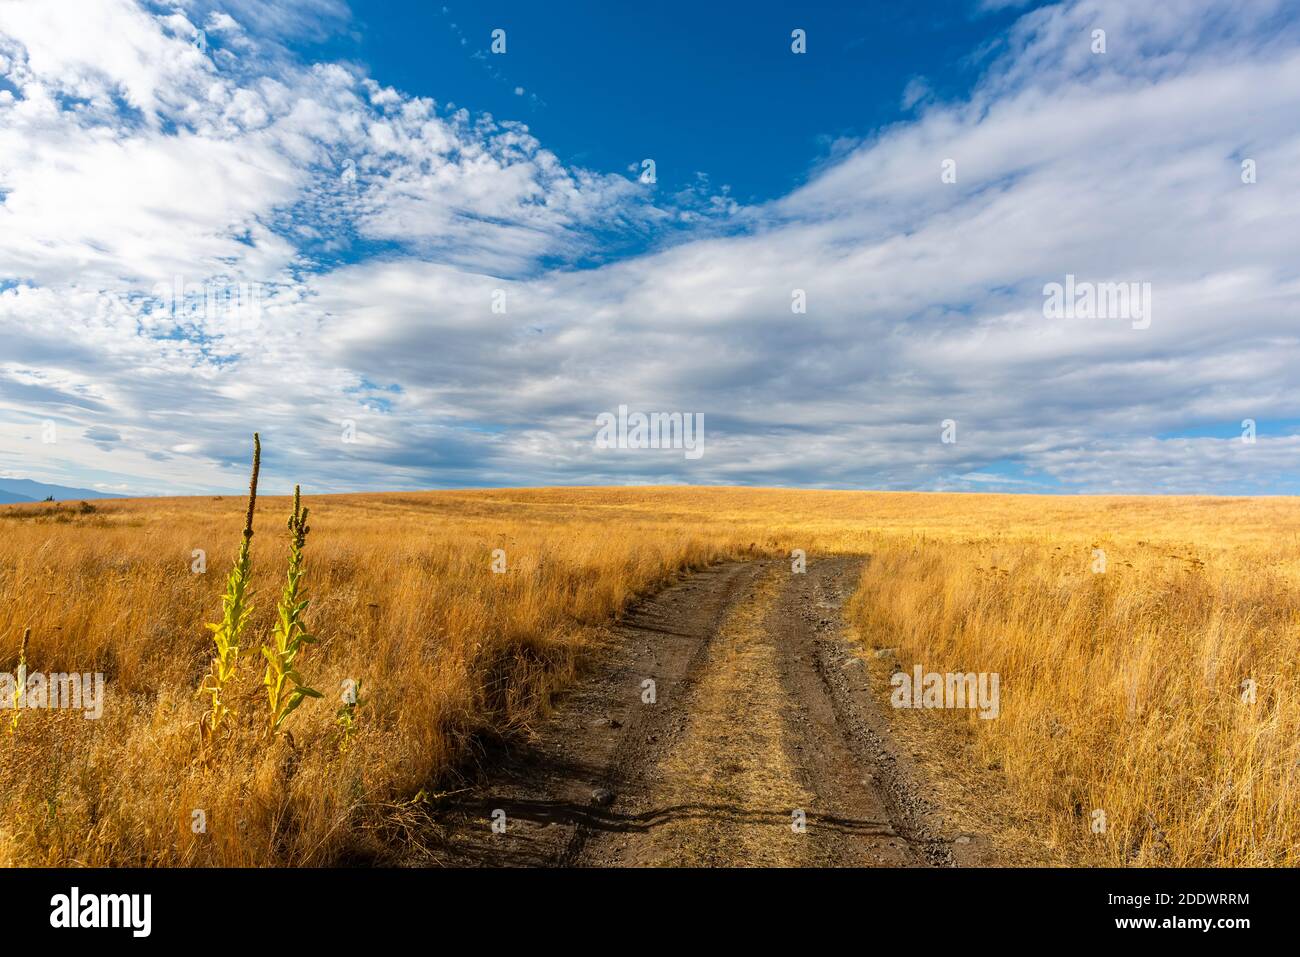 Dirt road in the steppe between yellow grass, blue sky with white clouds in the background. Stock Photo